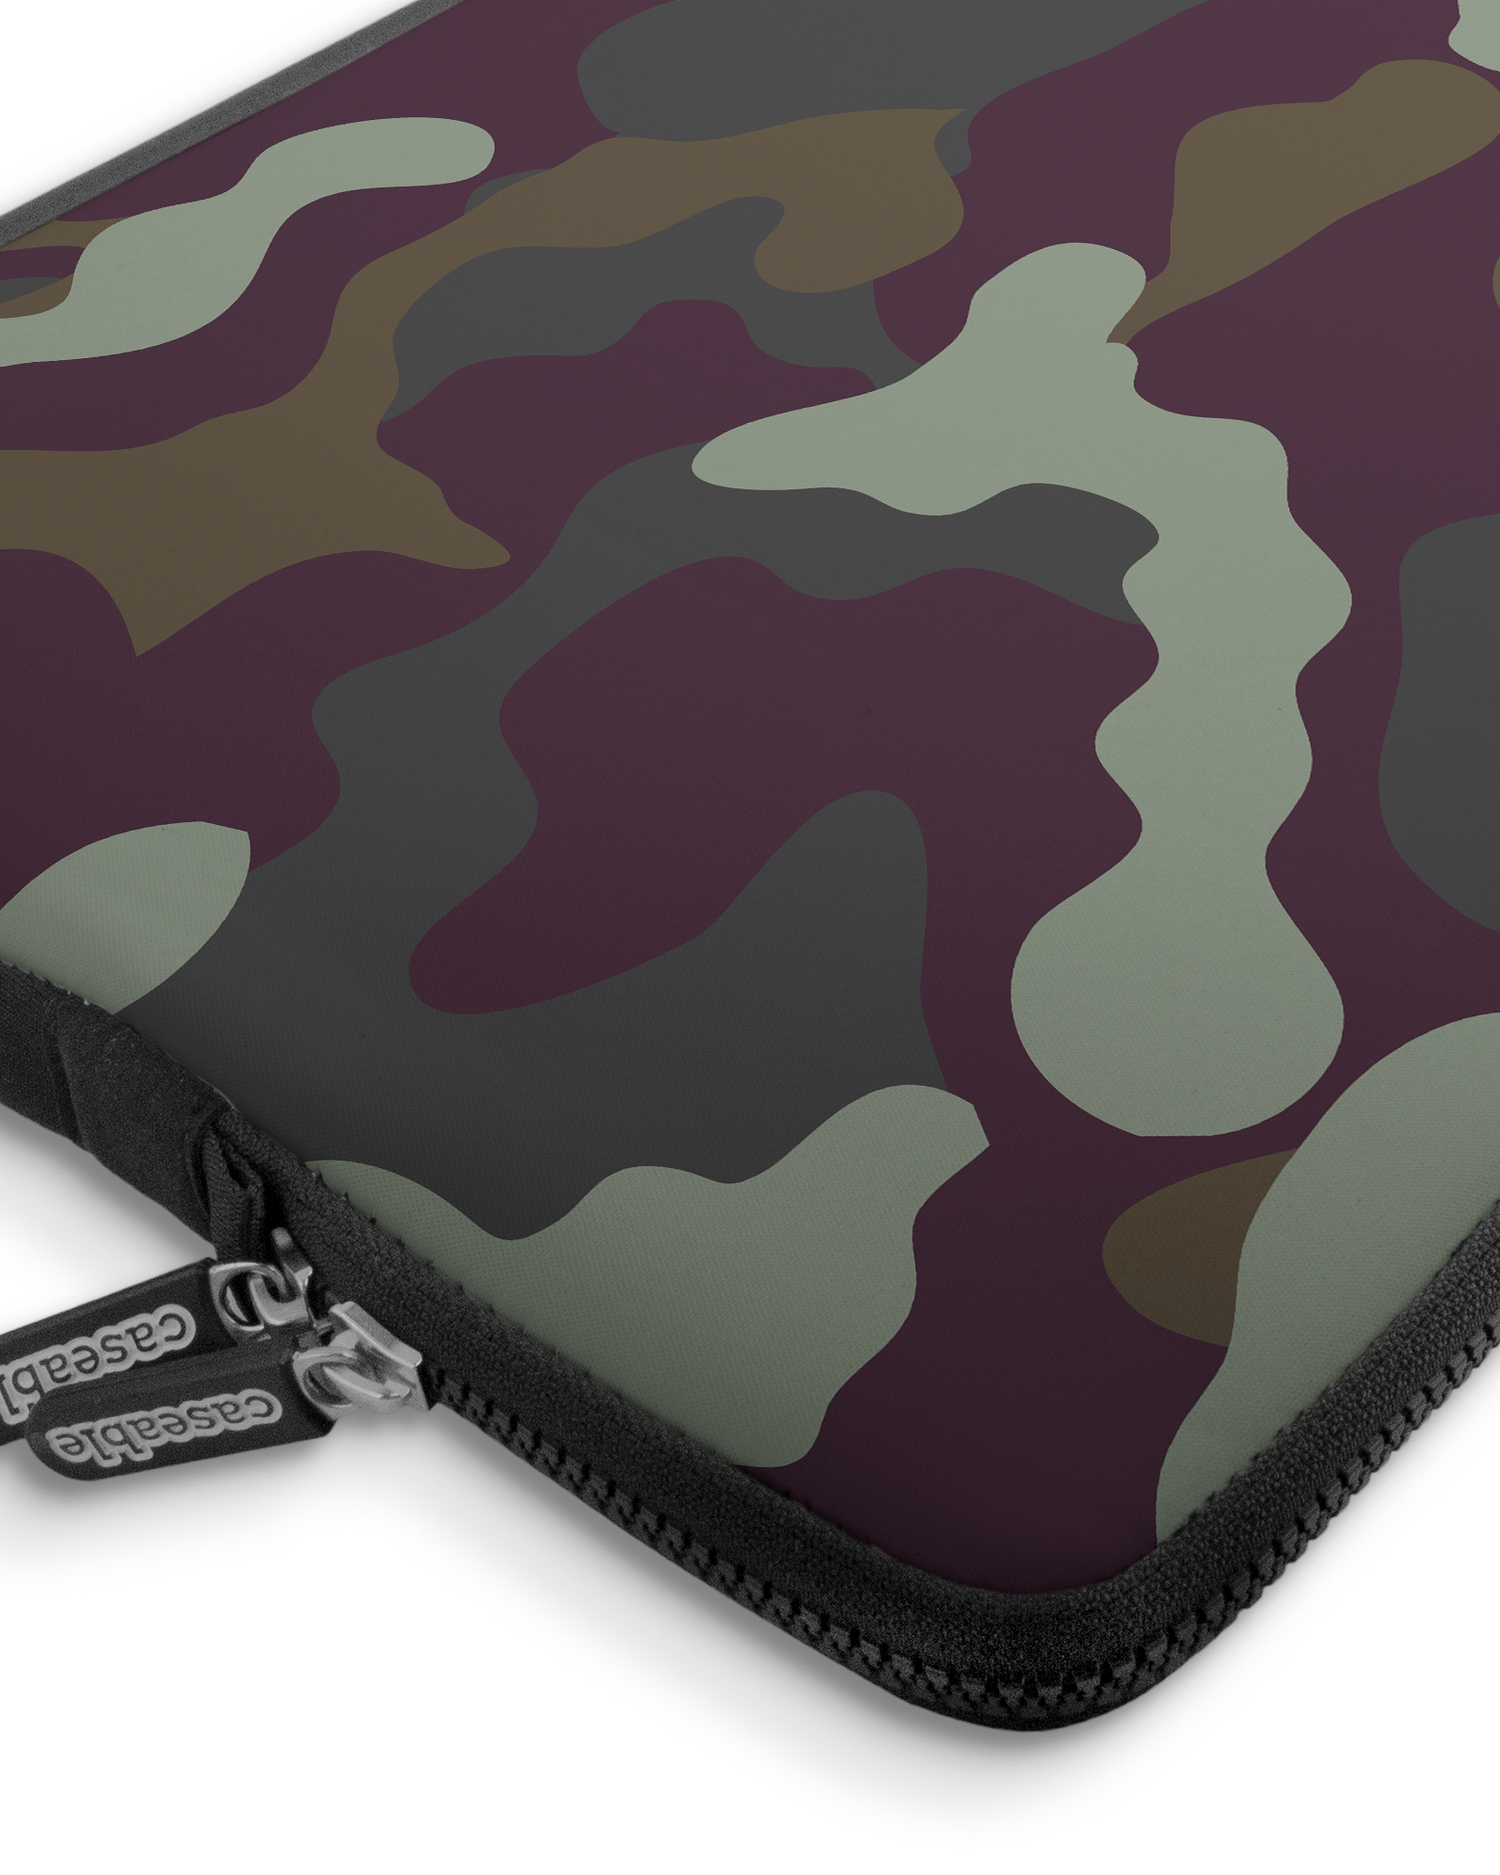 Night Camo Premium Laptop Bag 17 inch with device inside